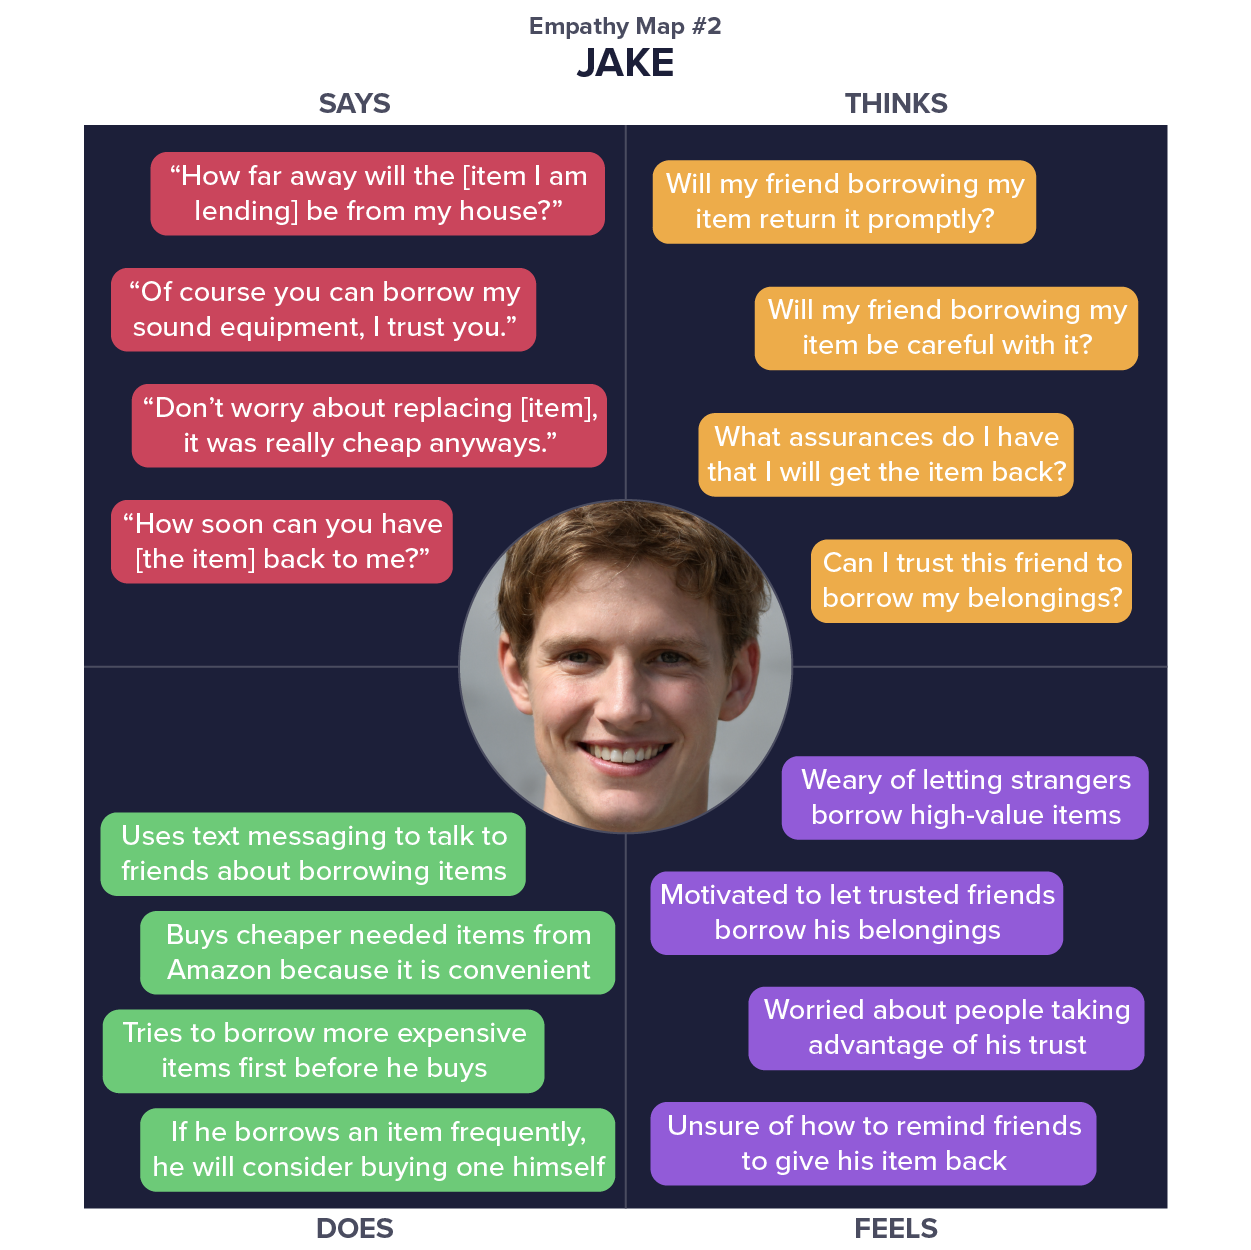 Empathy map for the Jake persona